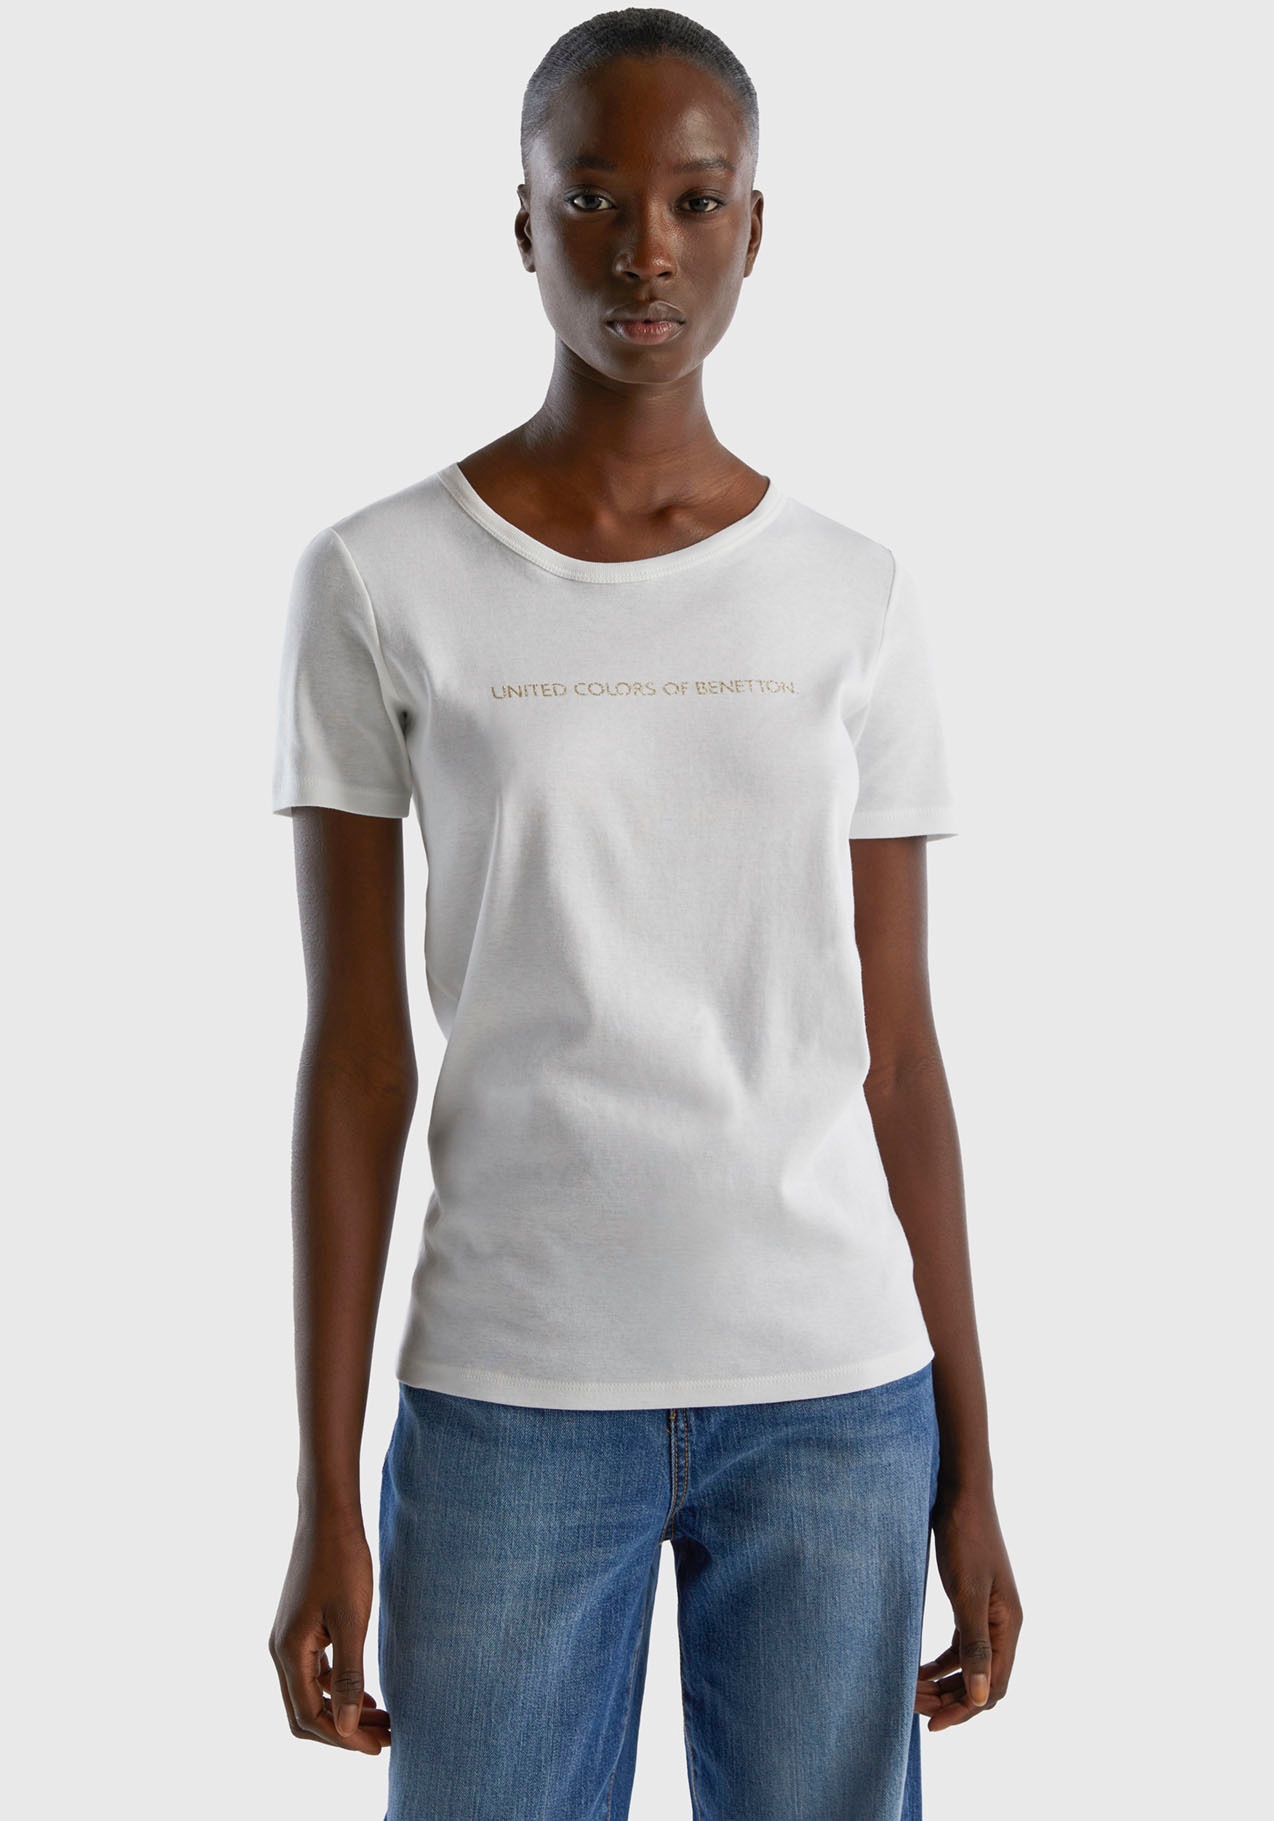 United Colors of Benetton T-Shirt, mit glitzerndem Druck von United Colors of Benetton